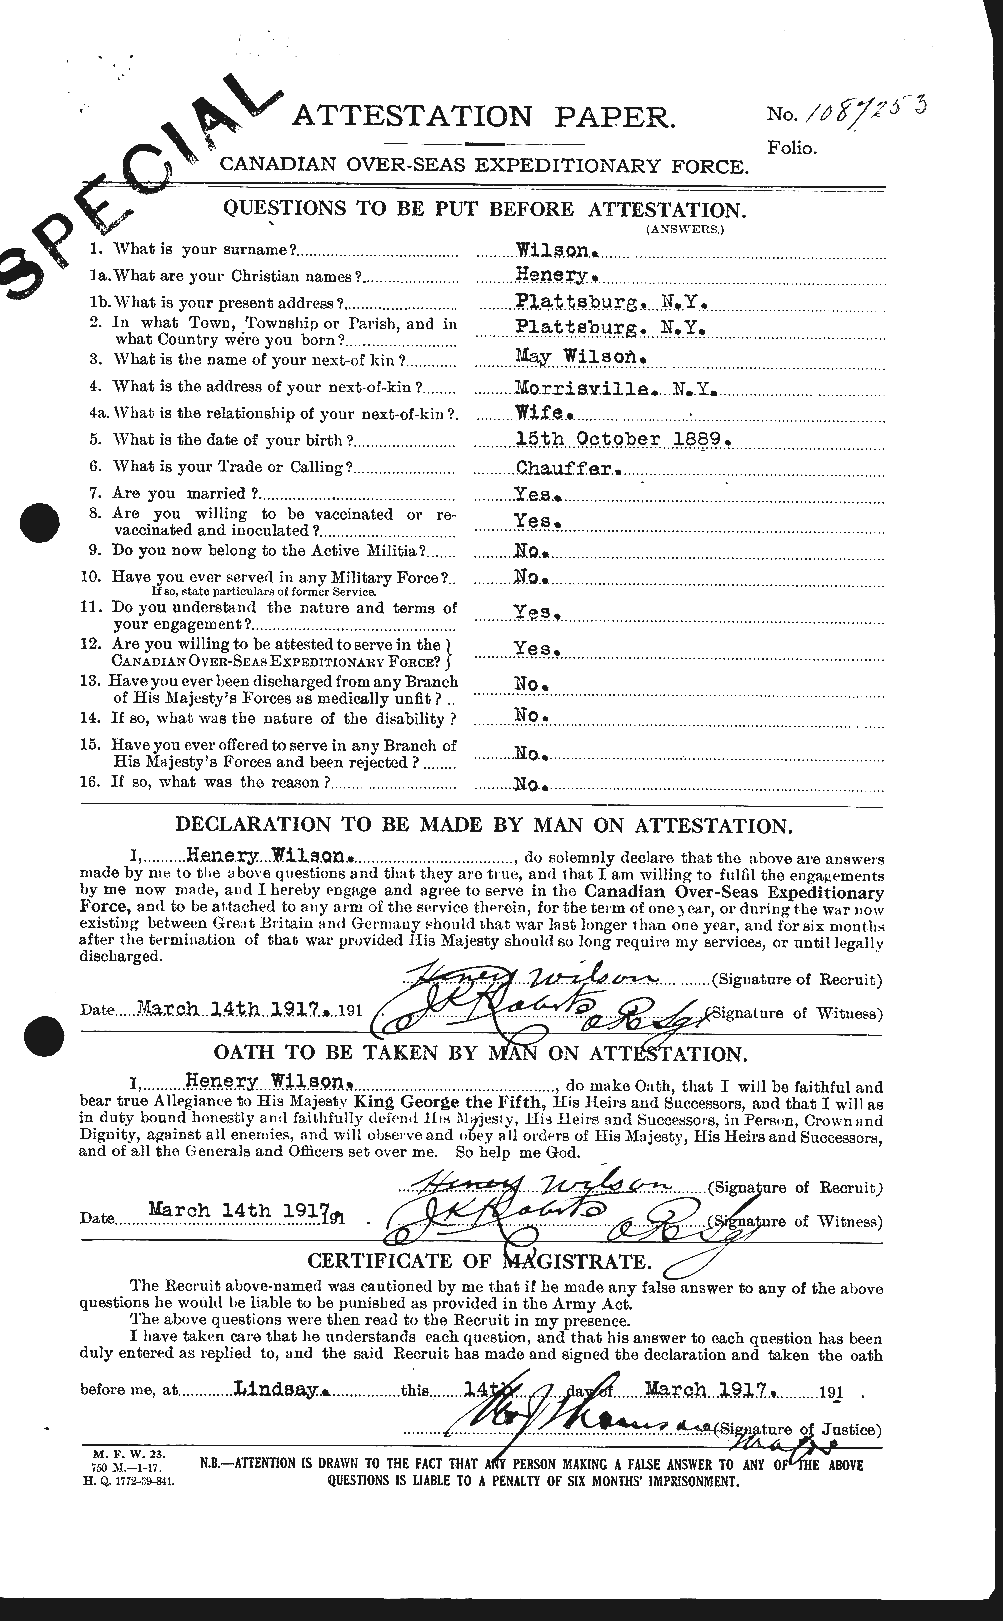 Personnel Records of the First World War - CEF 679492a